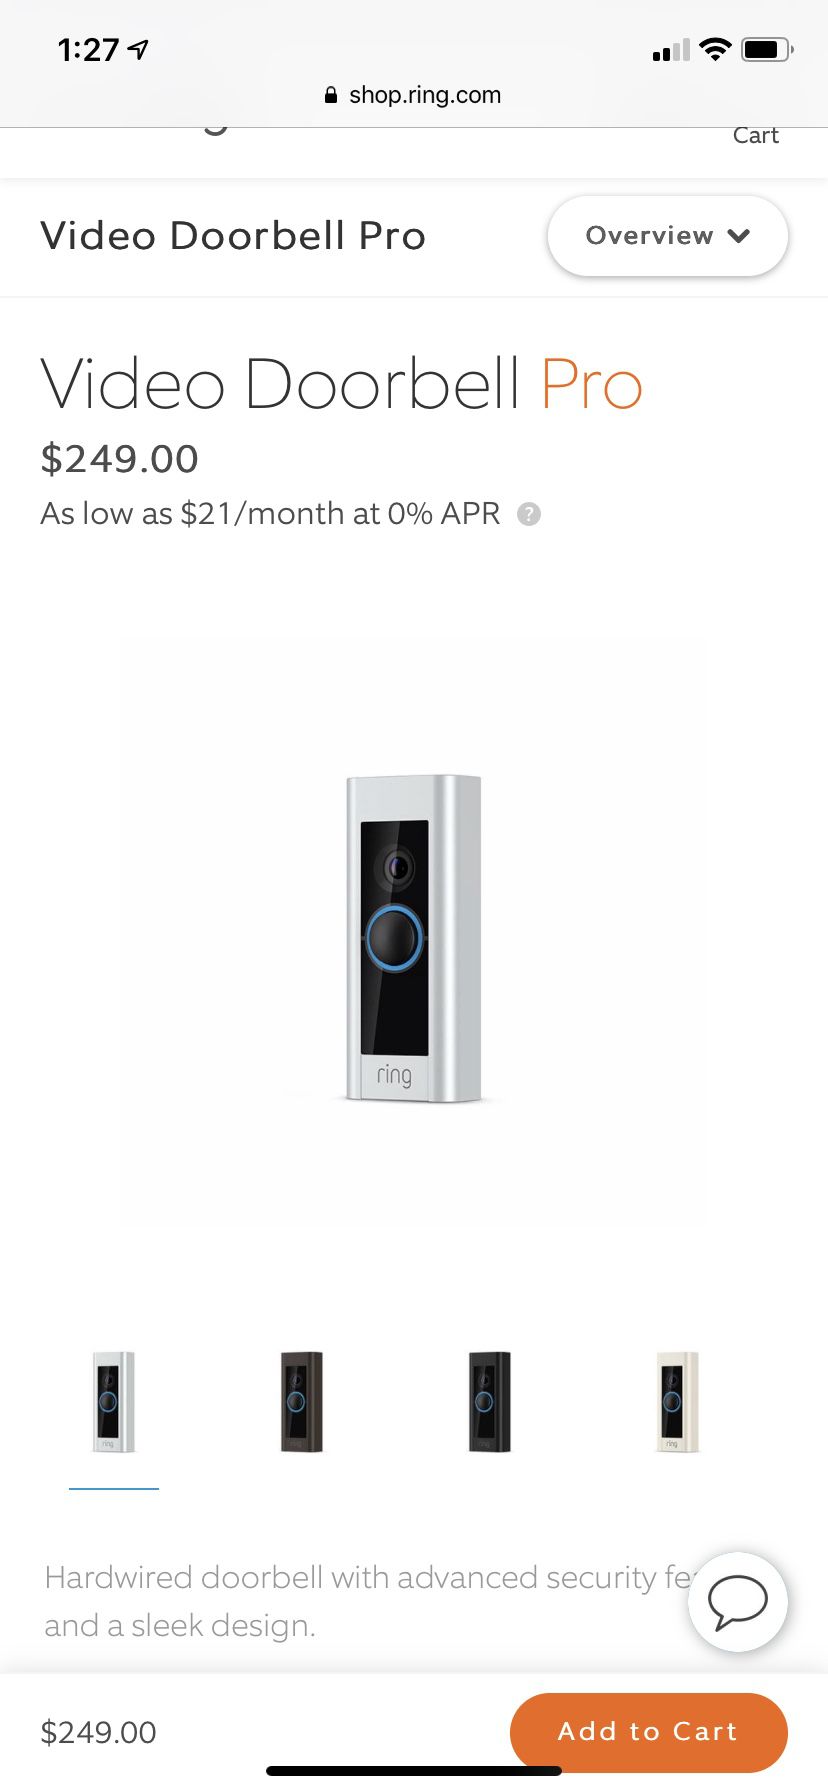 Video doorbell pro by ring